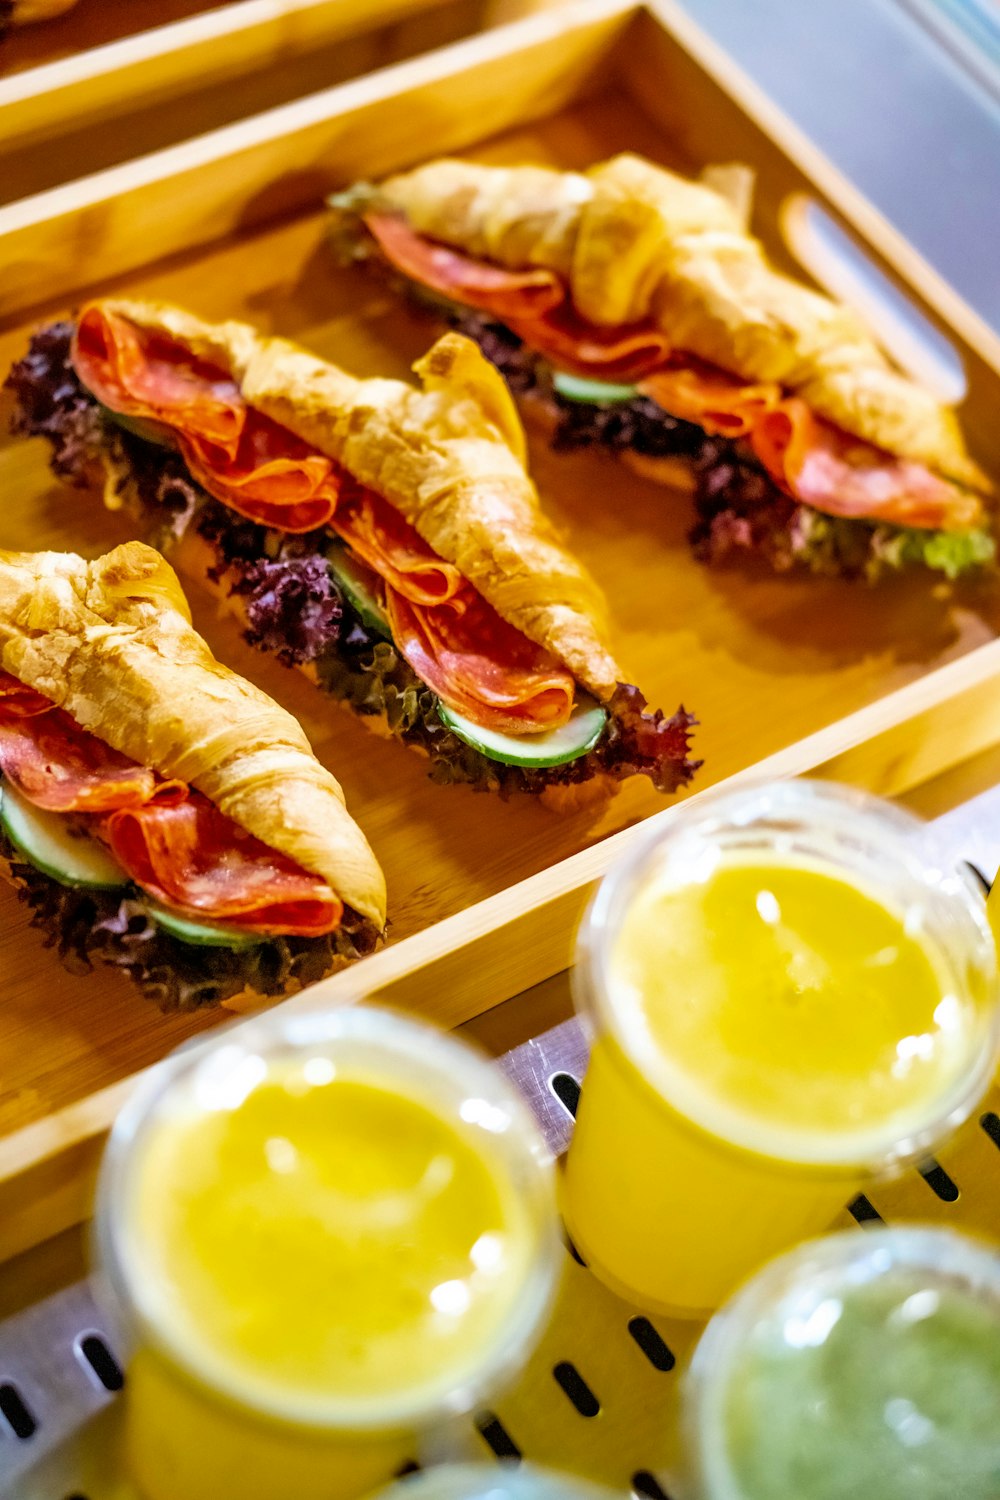 a tray with sandwiches and drinks on it